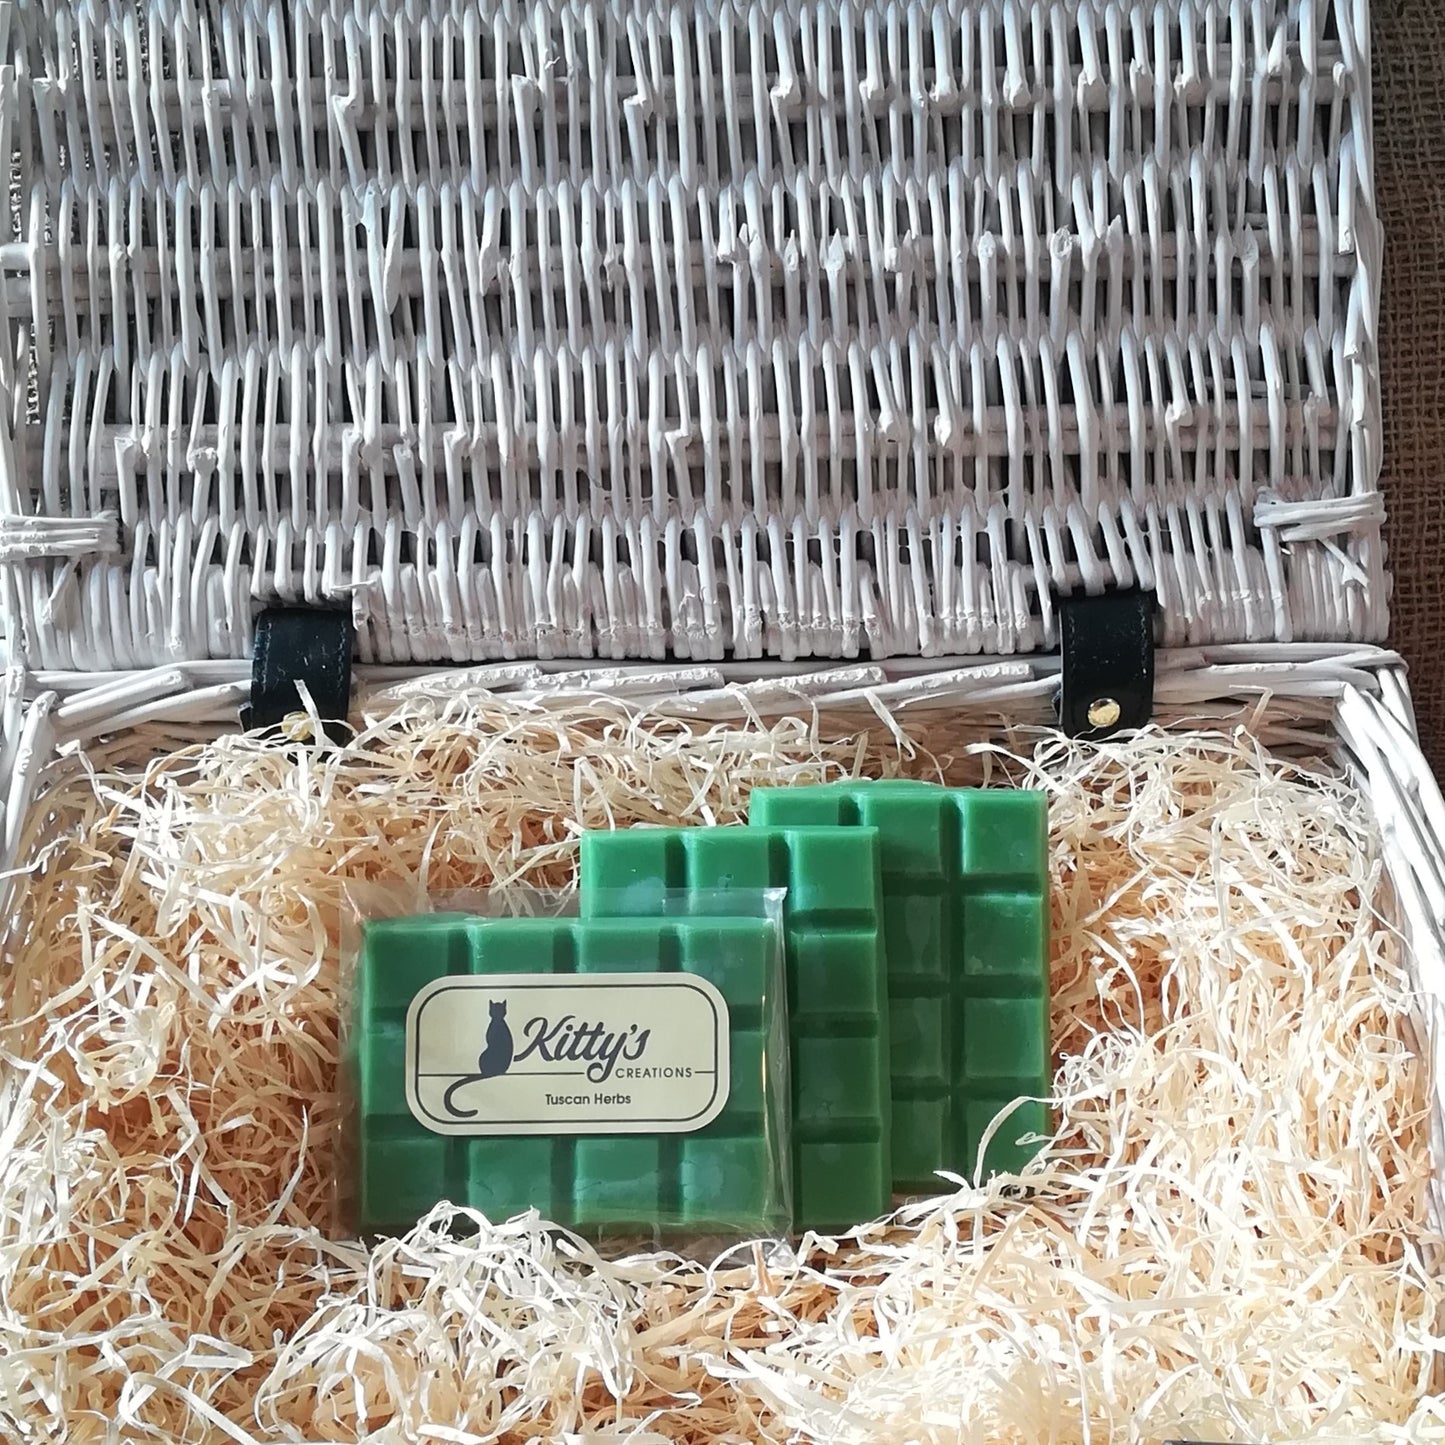 Three hand-made rectangular Wax Melts. Each is coloured like a deep green like a Mediterranean field, the melts are resting in a basket of straw. Each melt is a classic rural blend that begins with hand rubbed tomato leaves, fresh lemon groves and orange trees heavy with sun ripened fruit, before leading you down cobbled streets with crushed oregano and aromatic woods as you relax in the Mediterranean countryside.